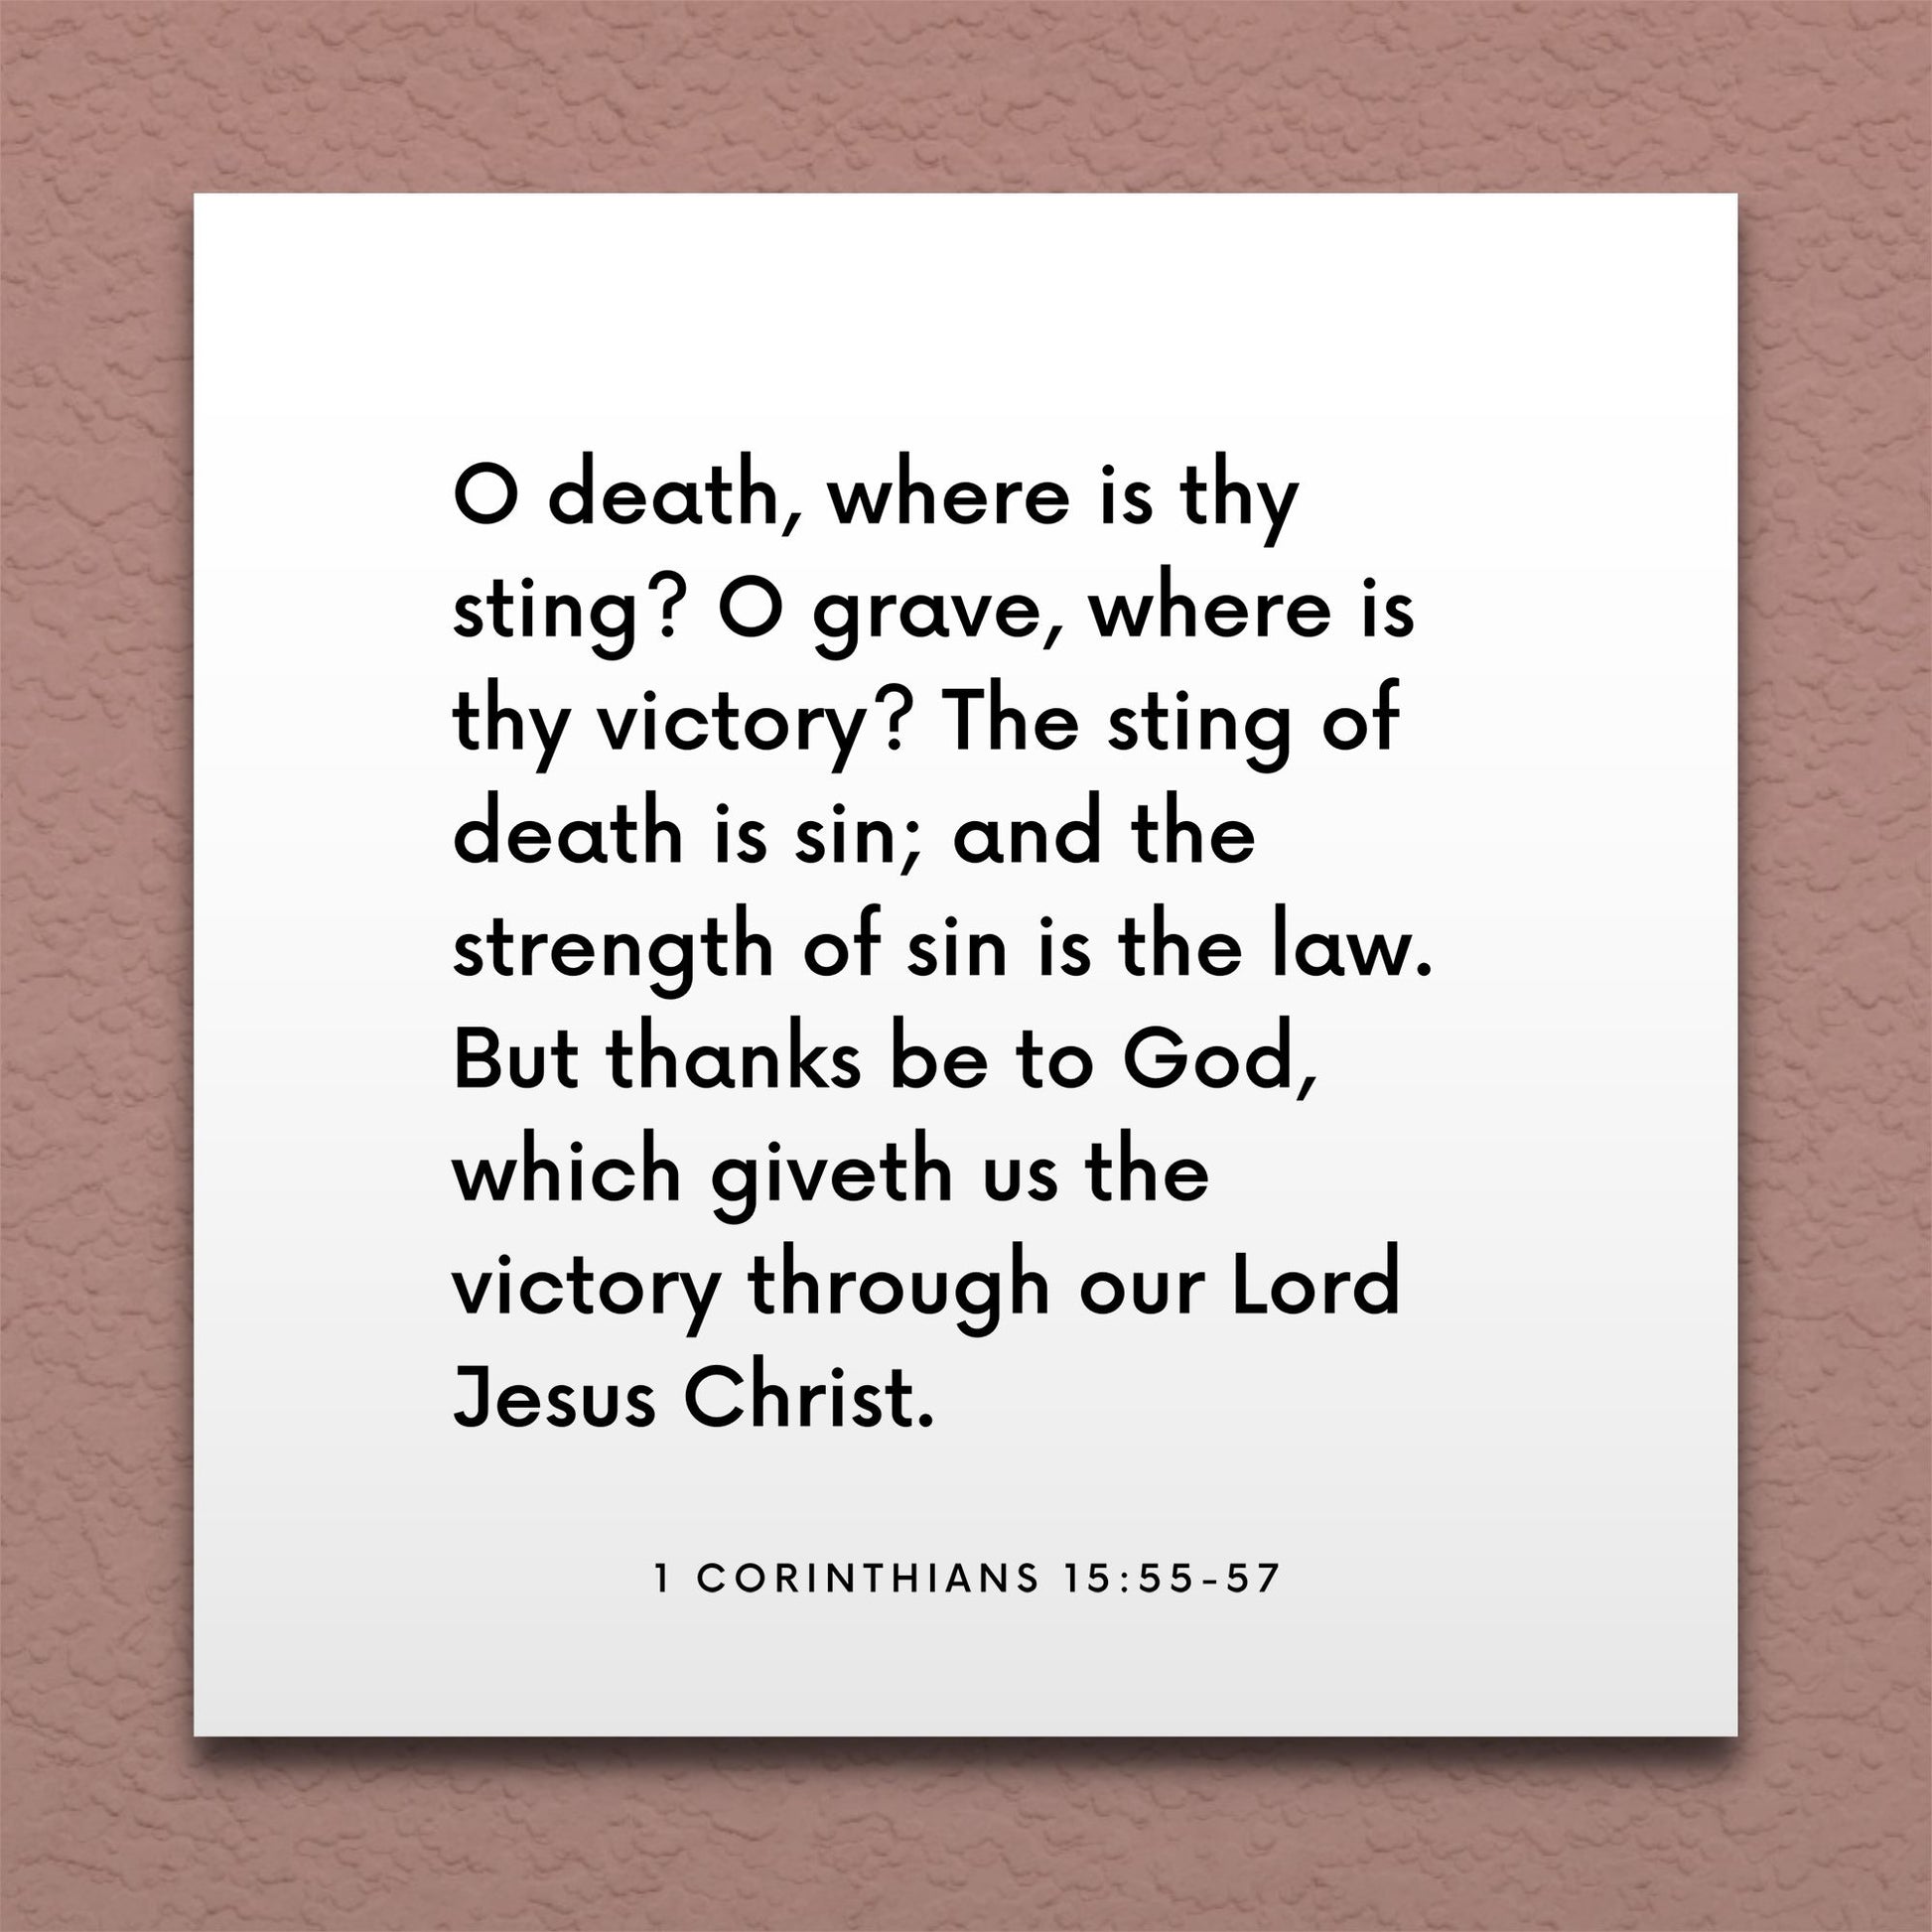 Wall-mounted scripture tile for 1 Corinthians 15:55-57 - "O death, where is thy sting? O grave, where is thy victory?"